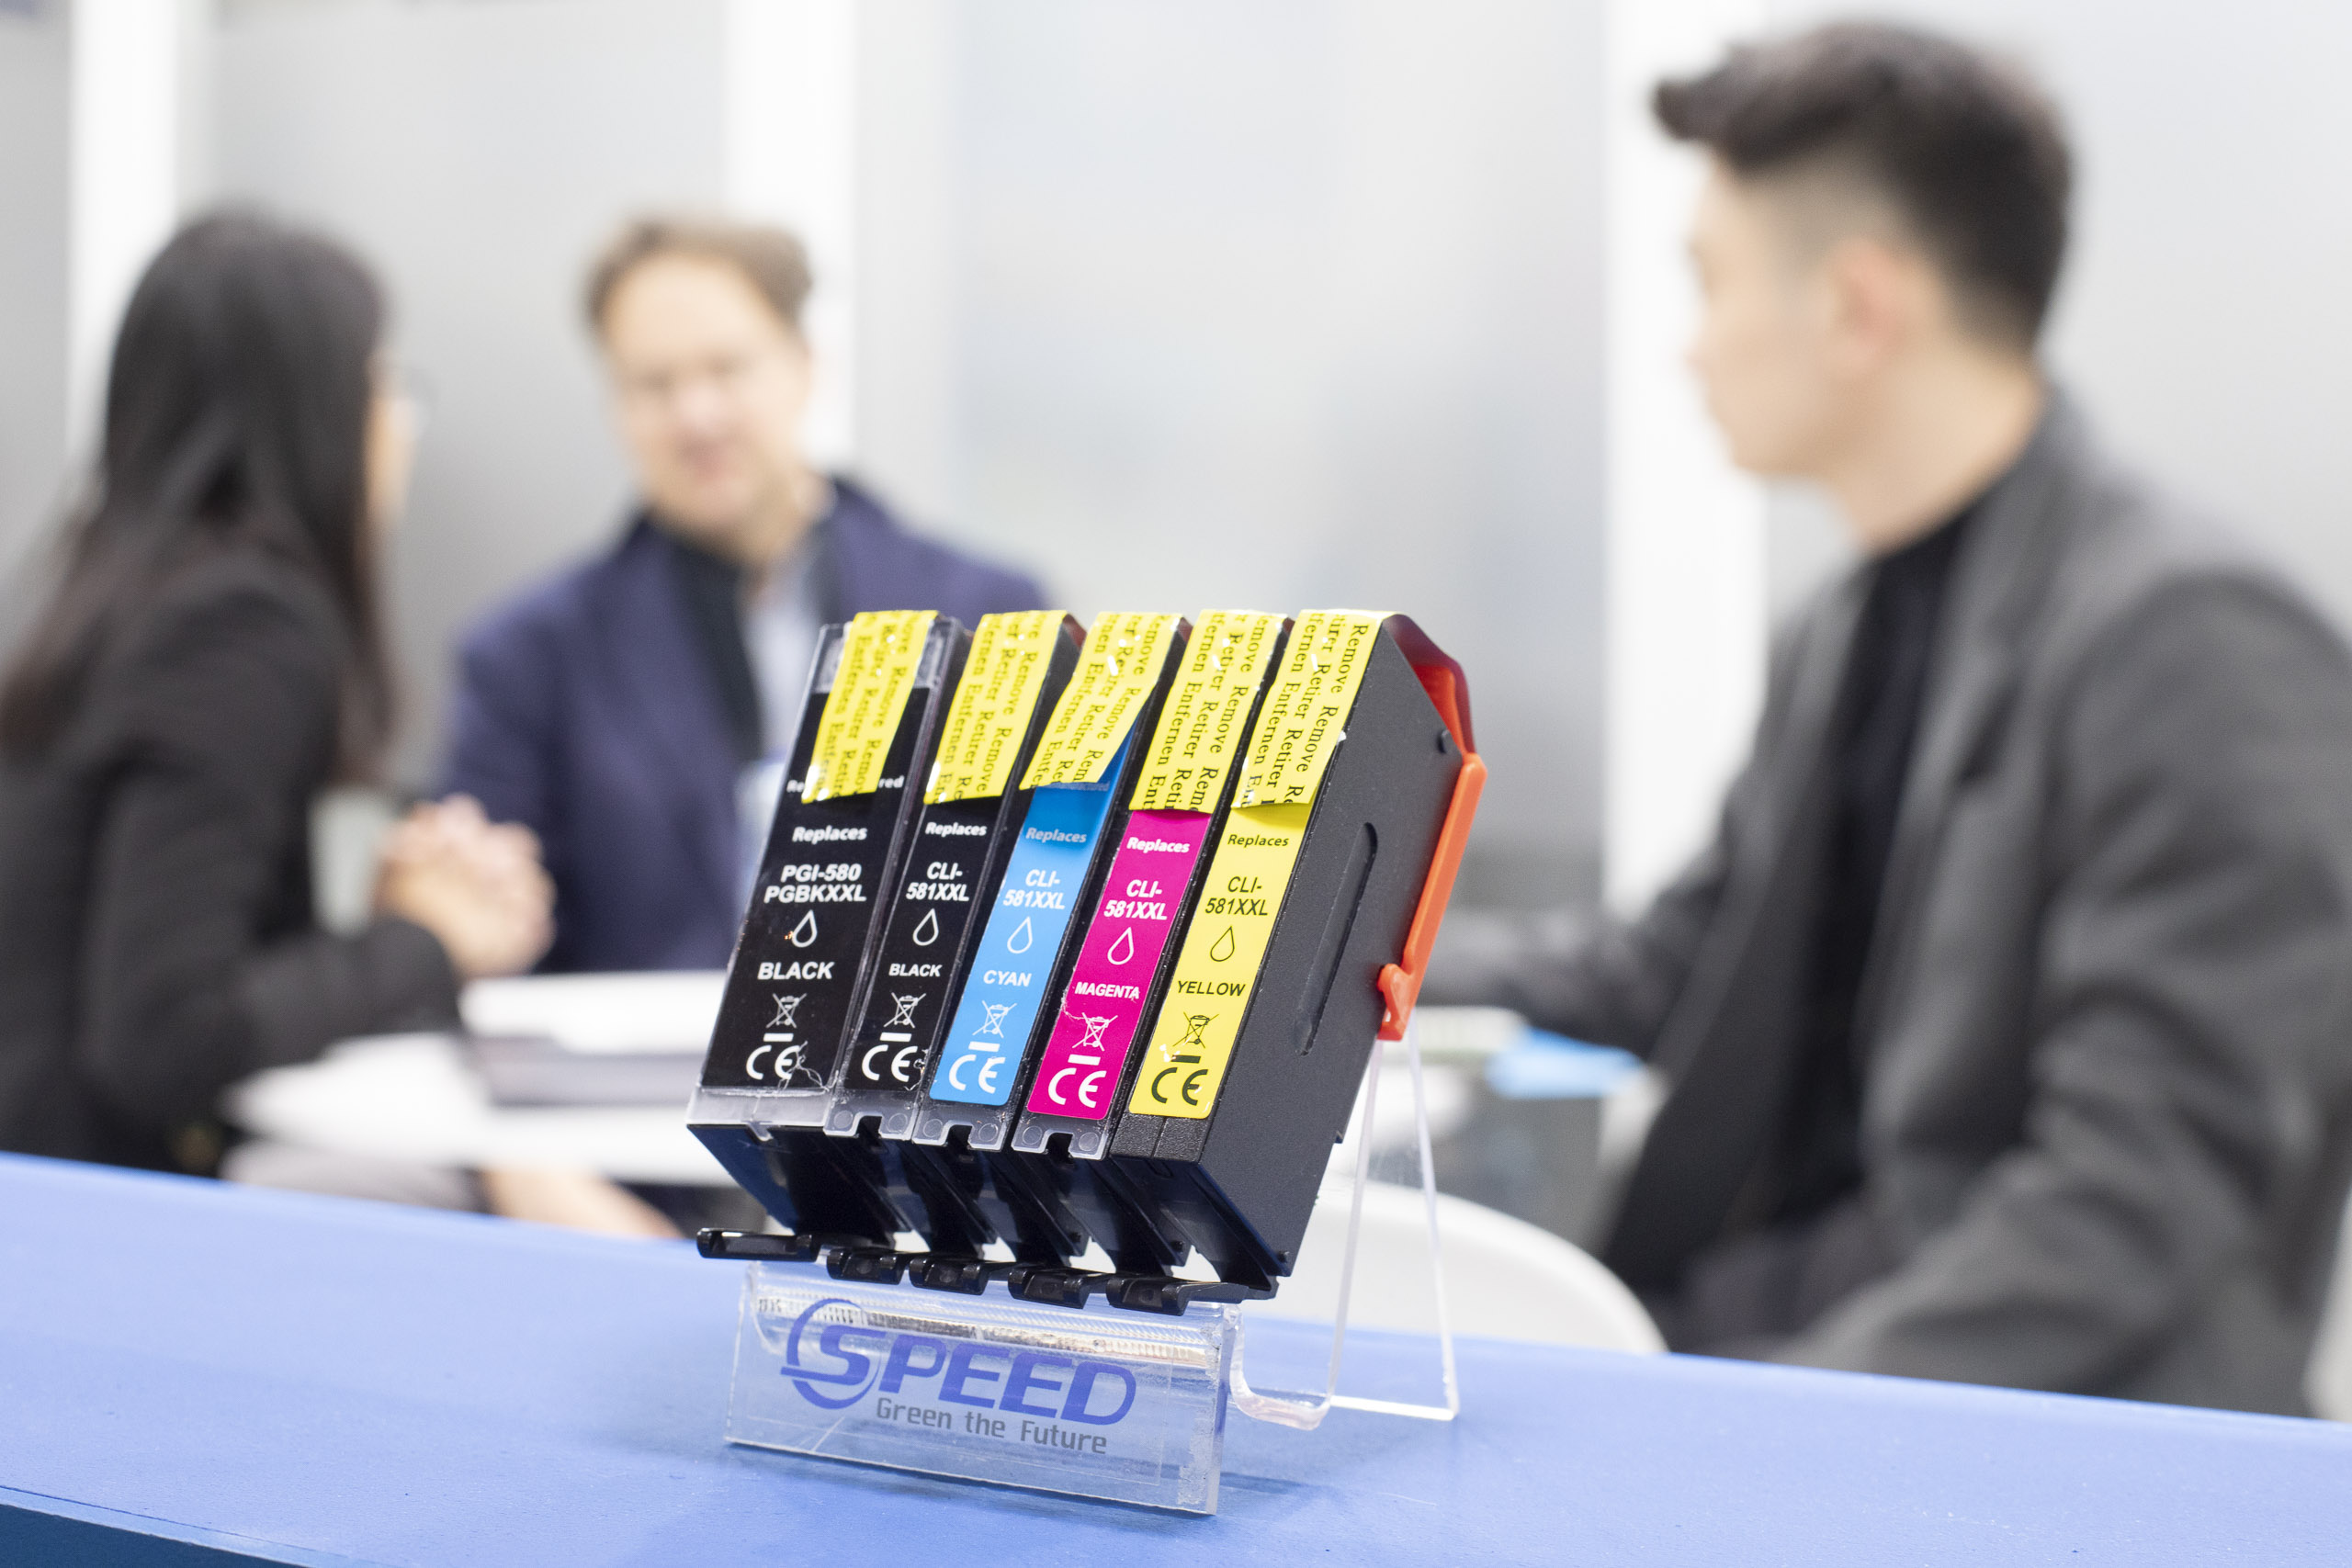 Speed Infotech (Beihai) presented remanufactured printer material at Remanexpo.